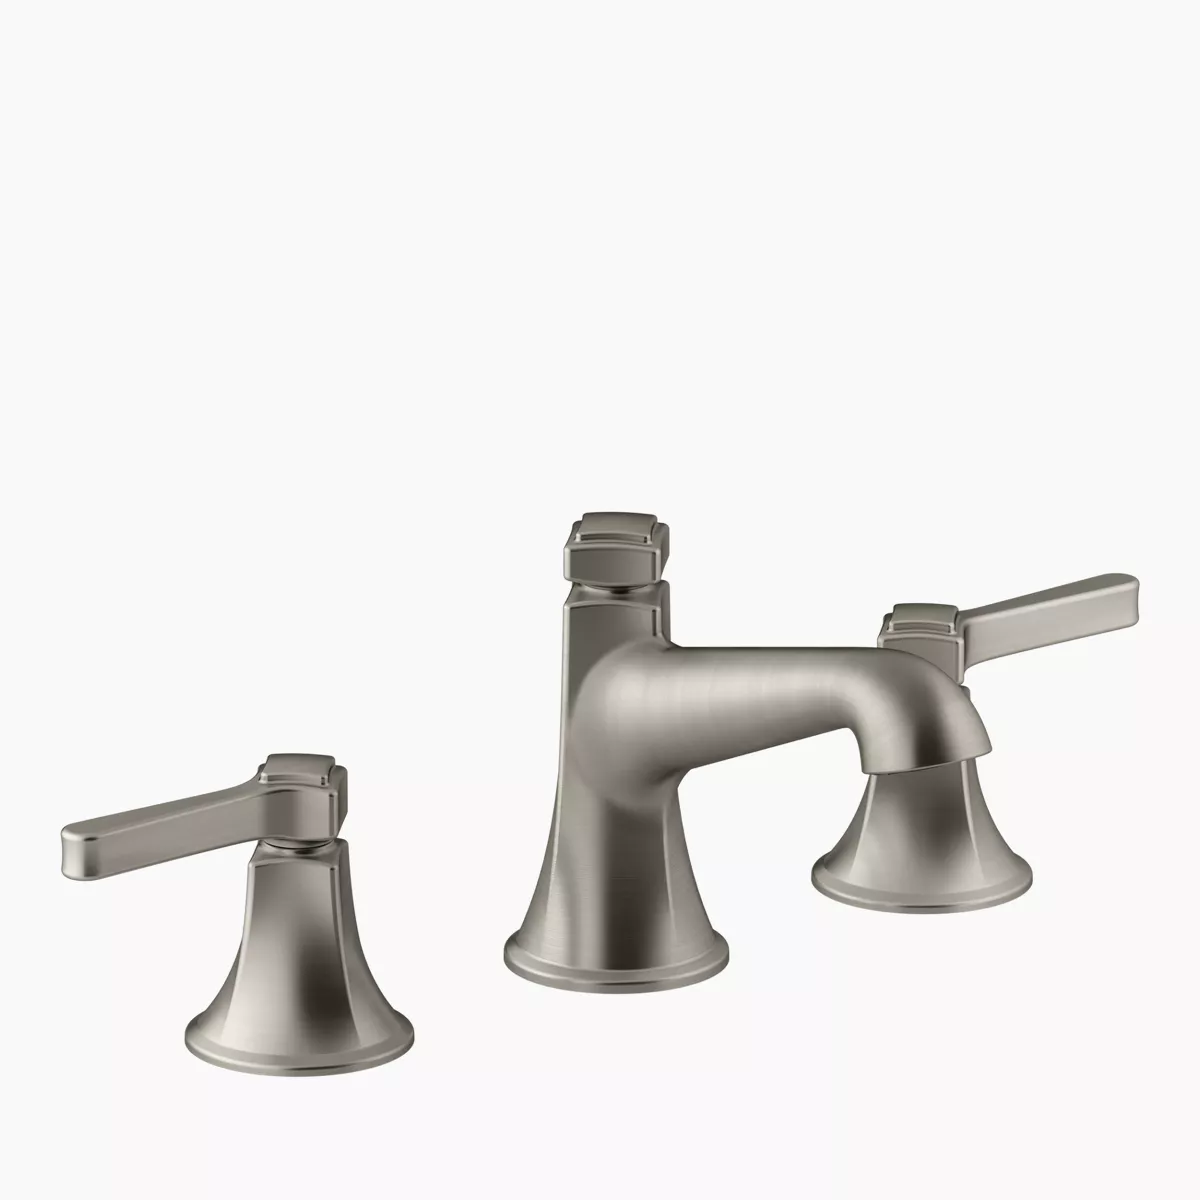 KOHLER | K-R77748-SD | Malleco Touchless Pull-Down Kitchen Sink Faucet